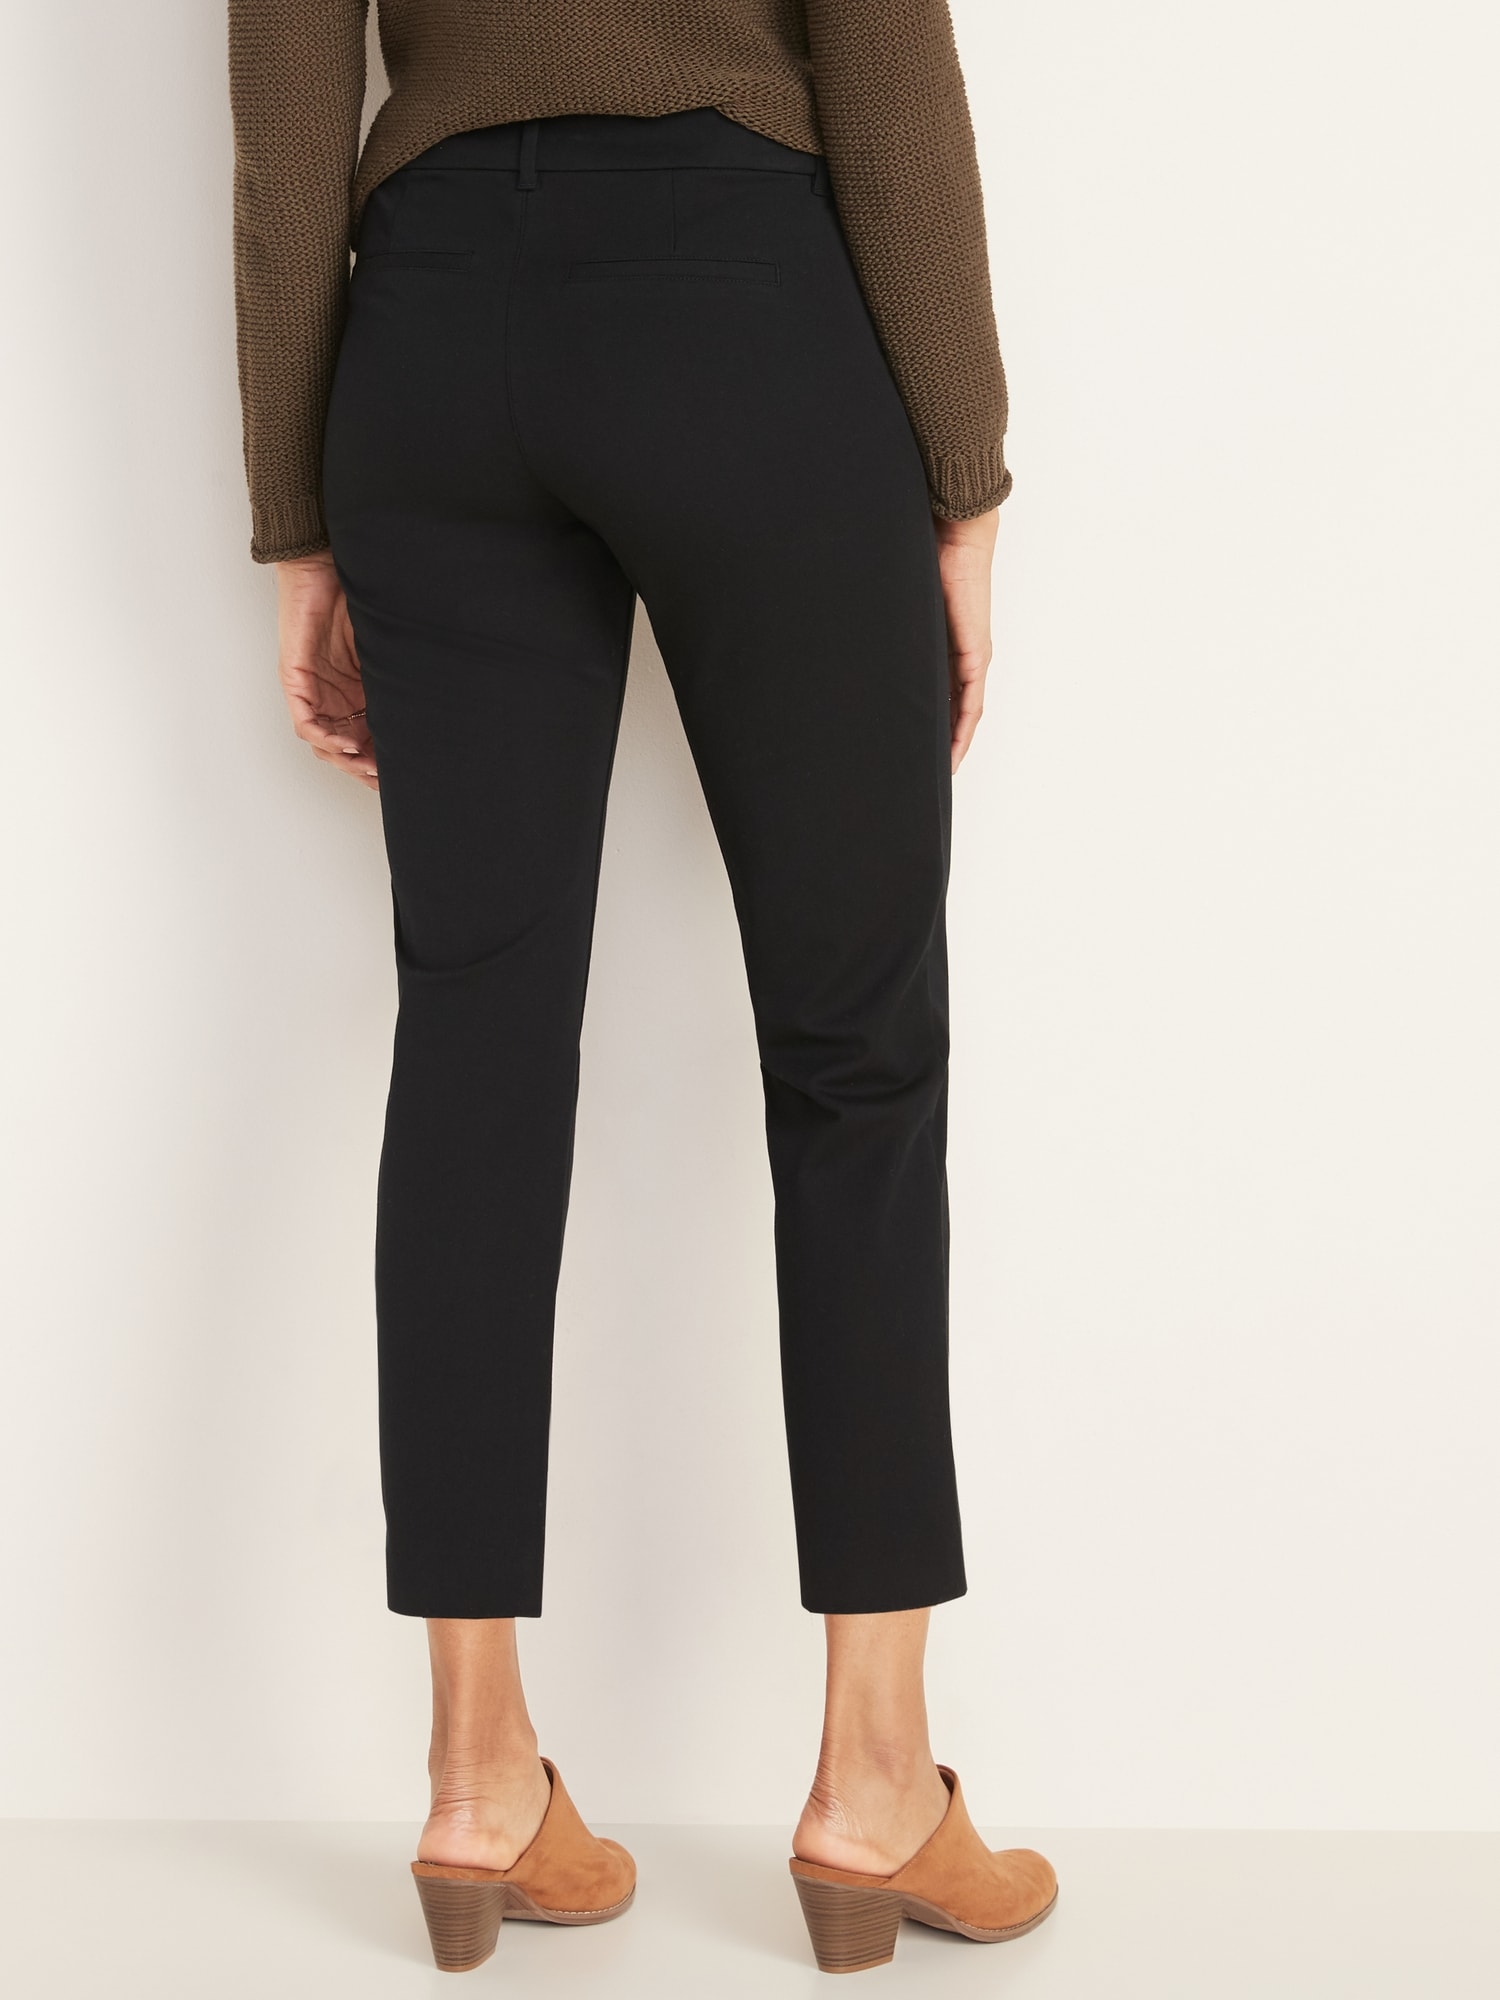 All-New Mid-Rise Pixie Straight-Leg Ankle Pants for Women